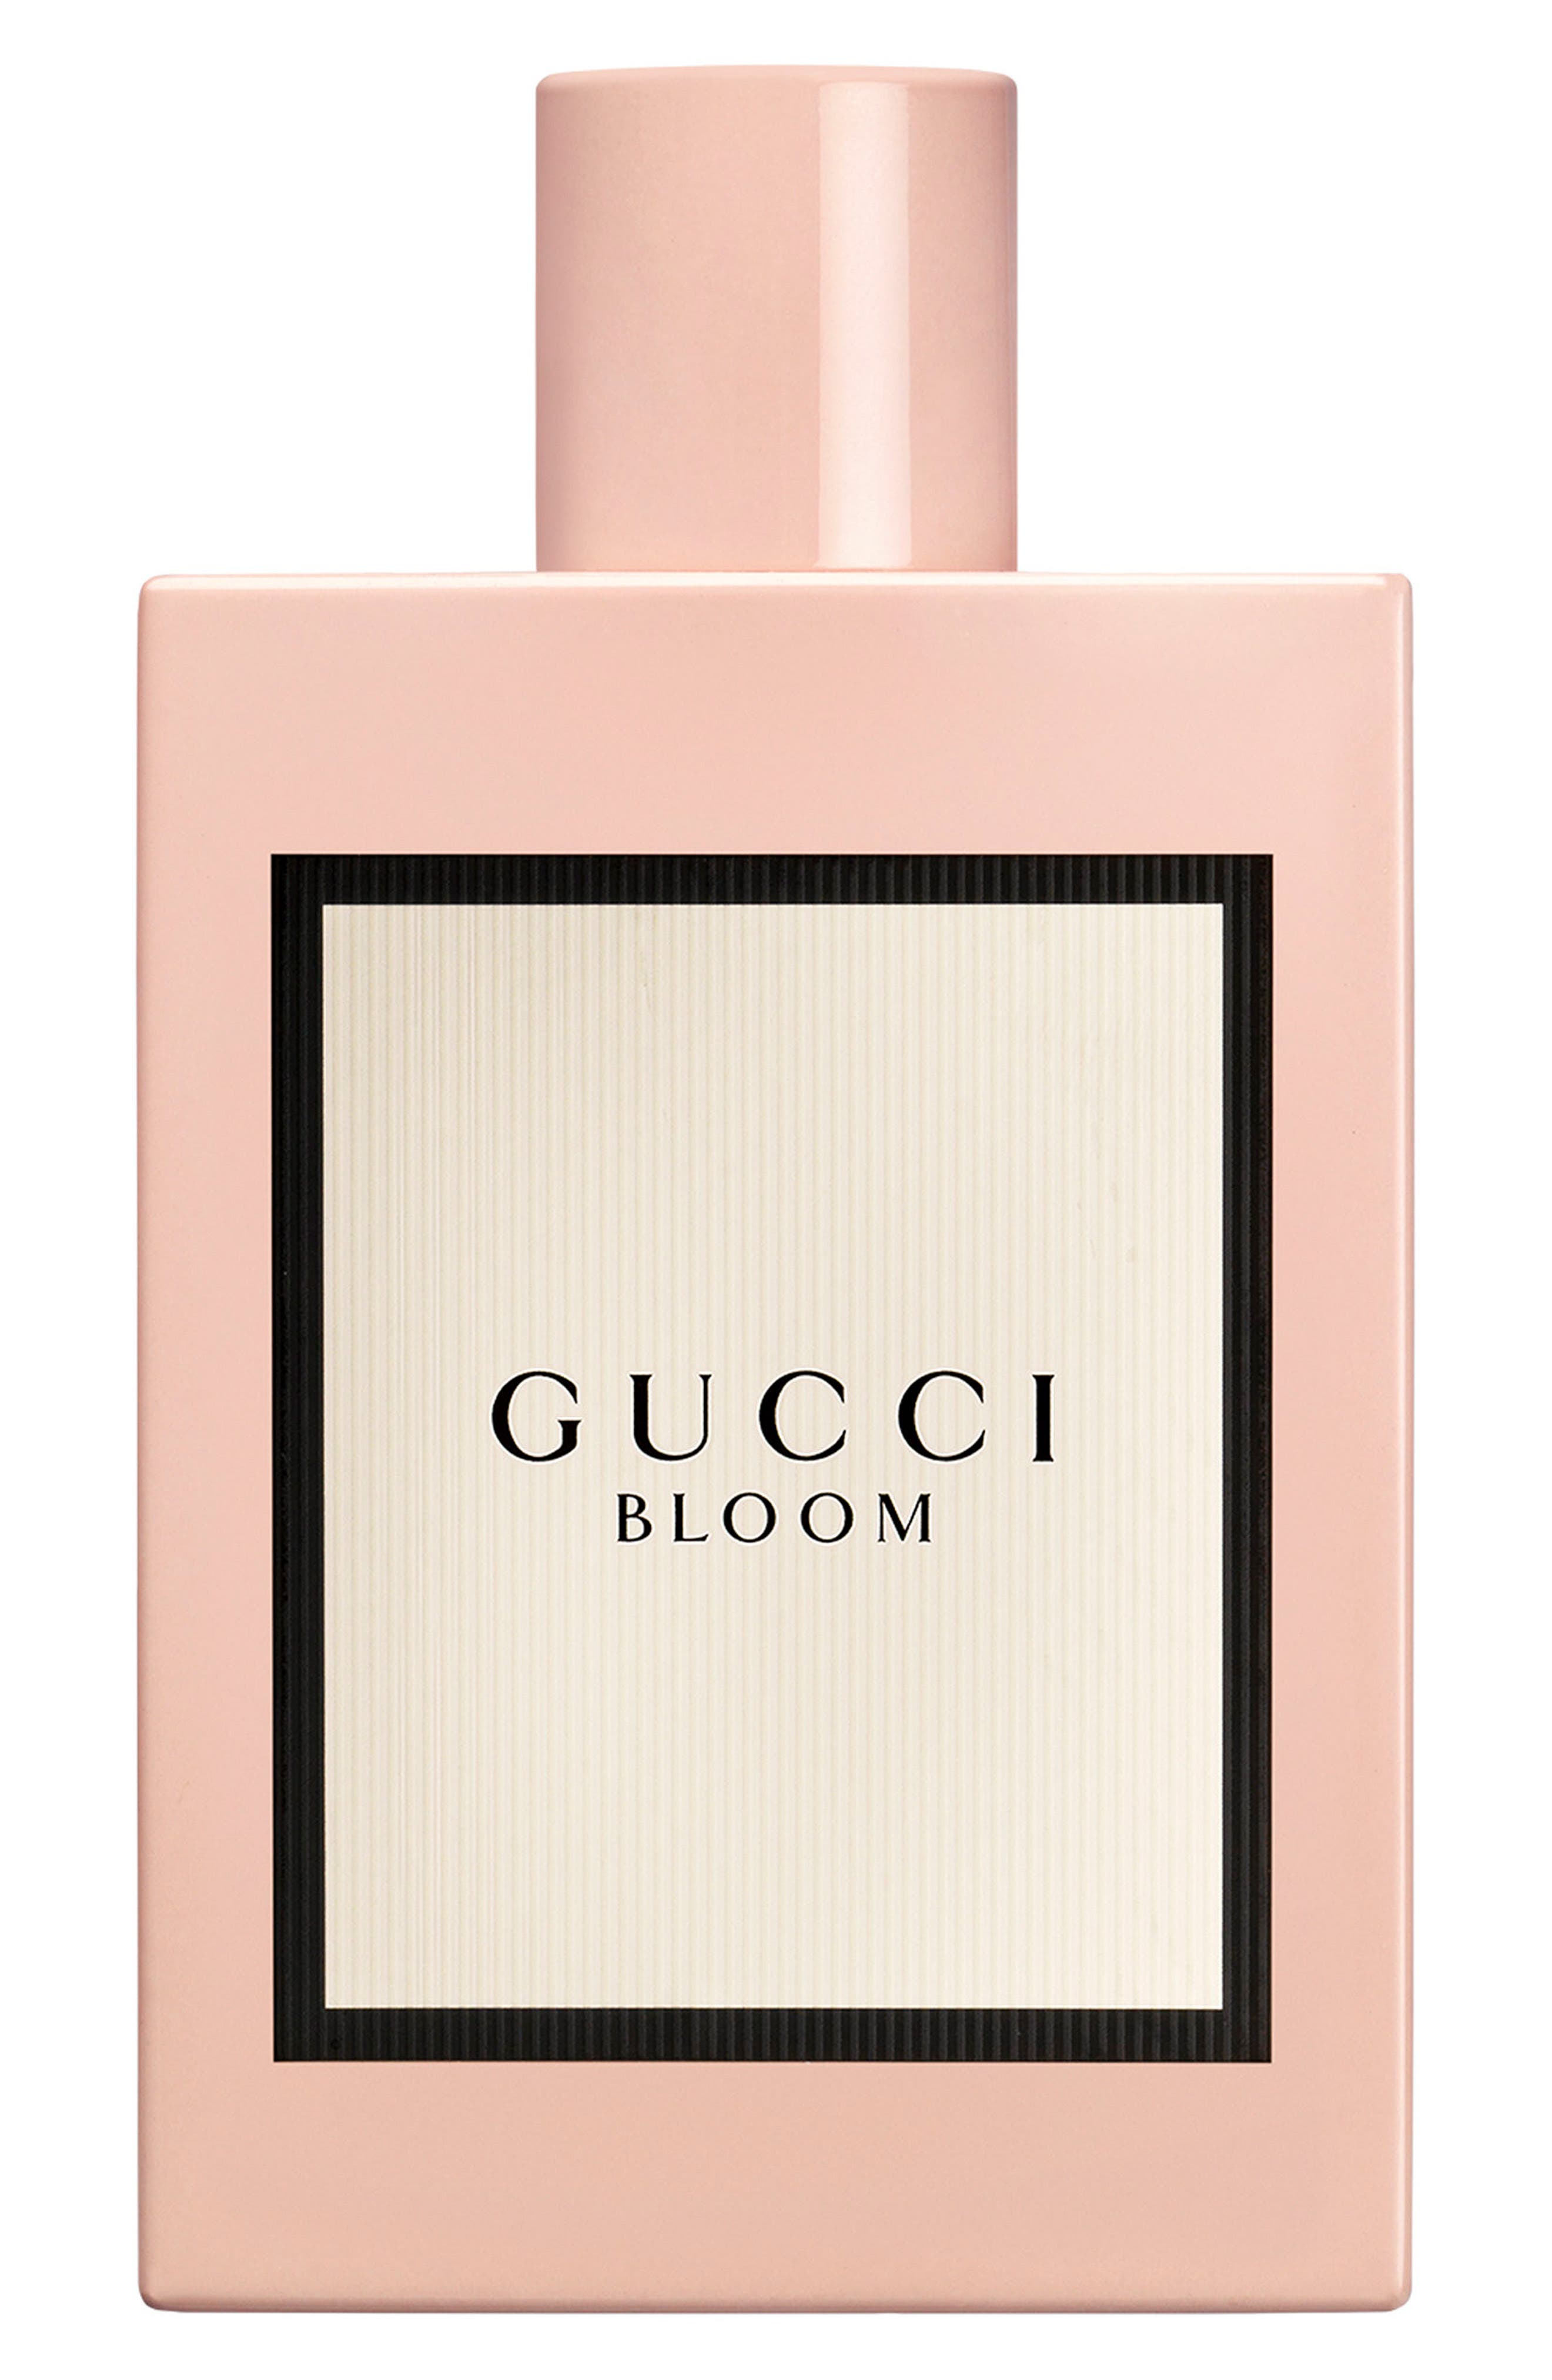 gucci bamboo smell